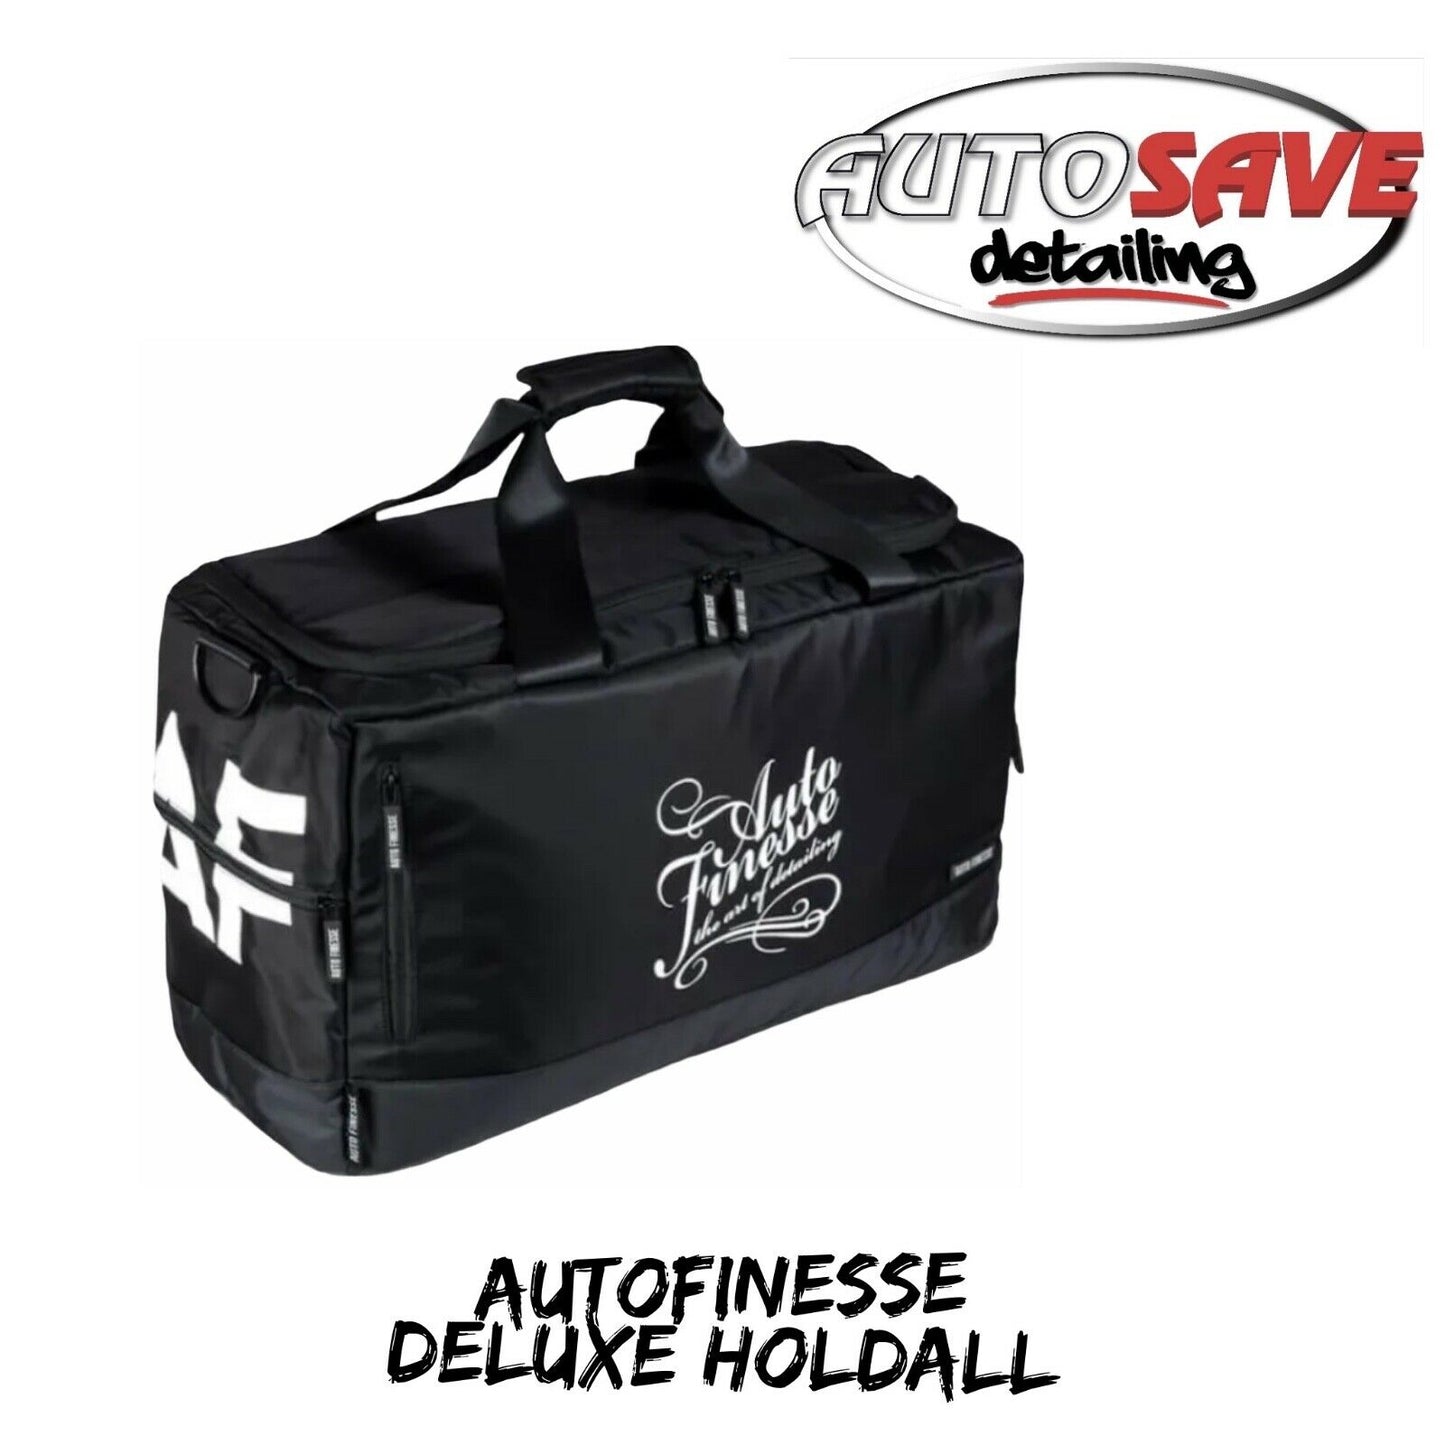 Auto Finesse Deluxe Detailiers Holdall professional kit carrier